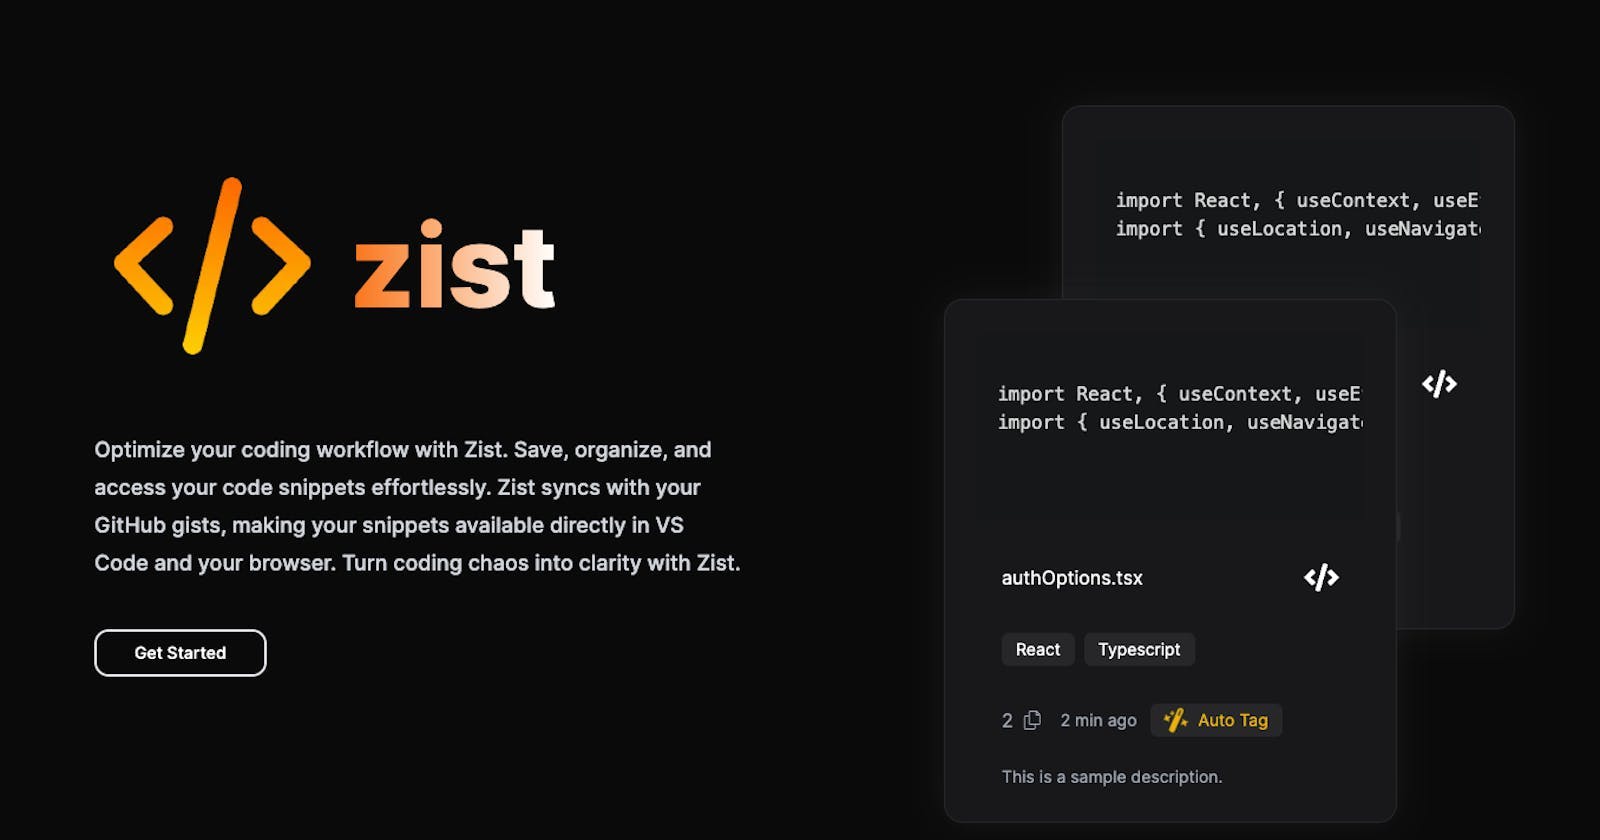 Turn Your Coding Chaos into Clarity with Zist: The Ultimate Code Snippet Manager